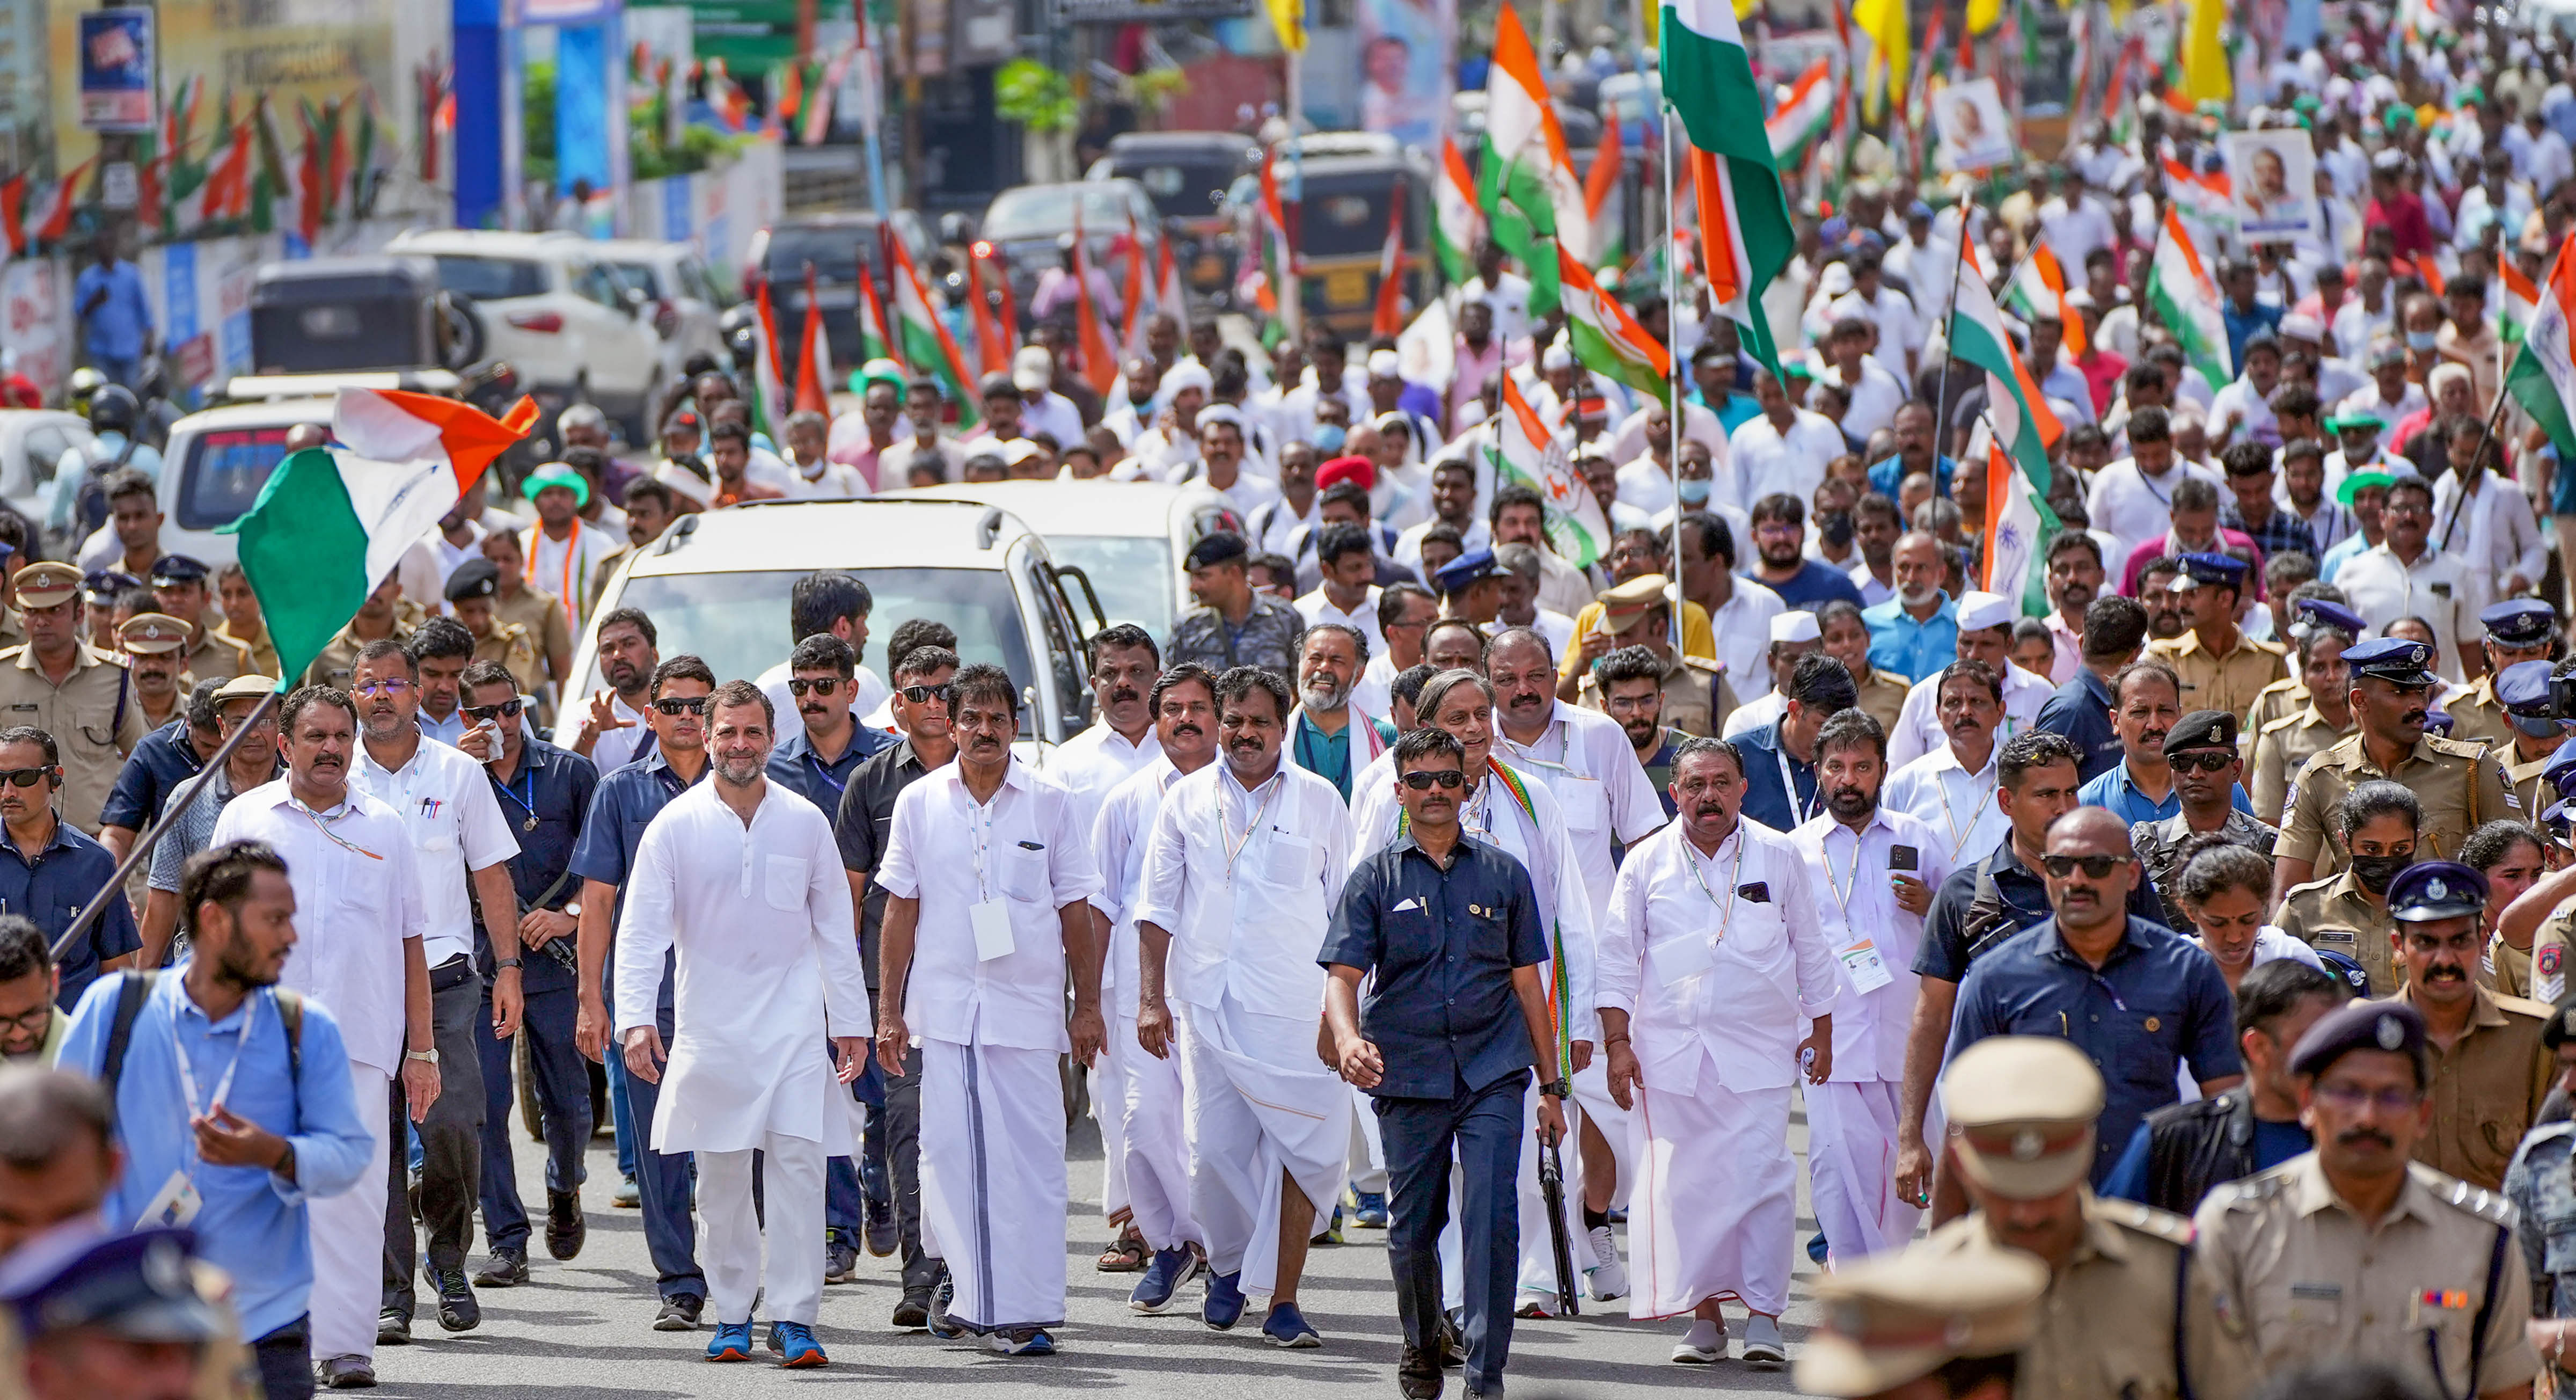 : Congress leaders Rahul Gandhi, KC Venugopal, Shashi Tharoor and other party workers during the Bharat Jodo Yatra. Credit: PTI Photo